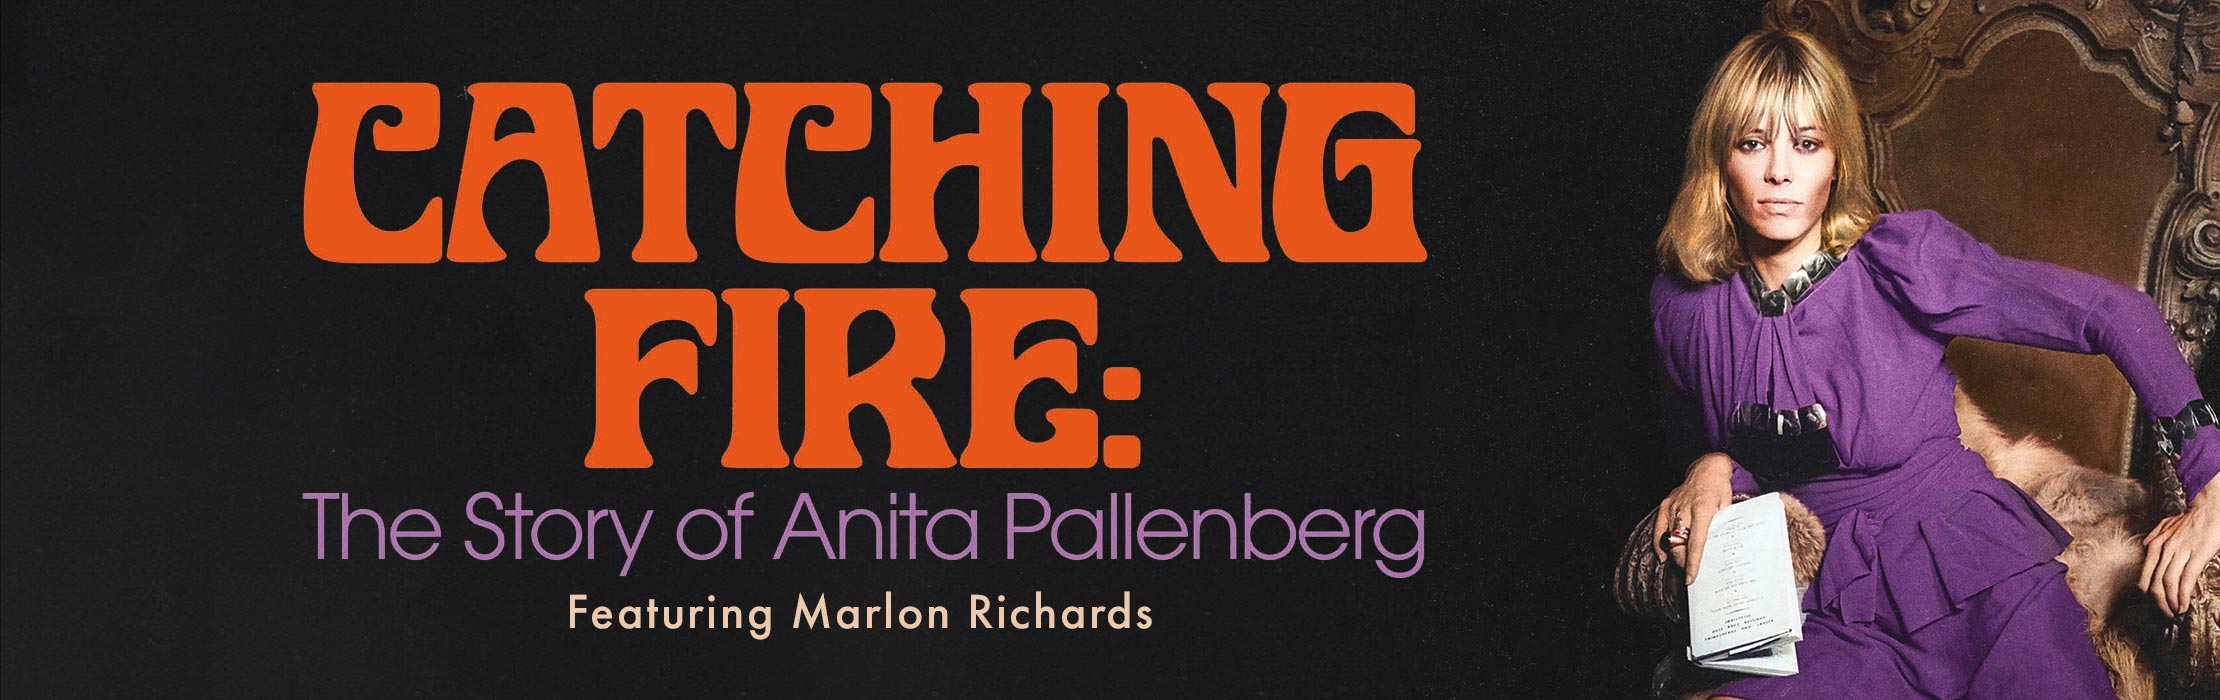 /film/Catching-Fire-The-Story-Of-Anita-Pallenberg